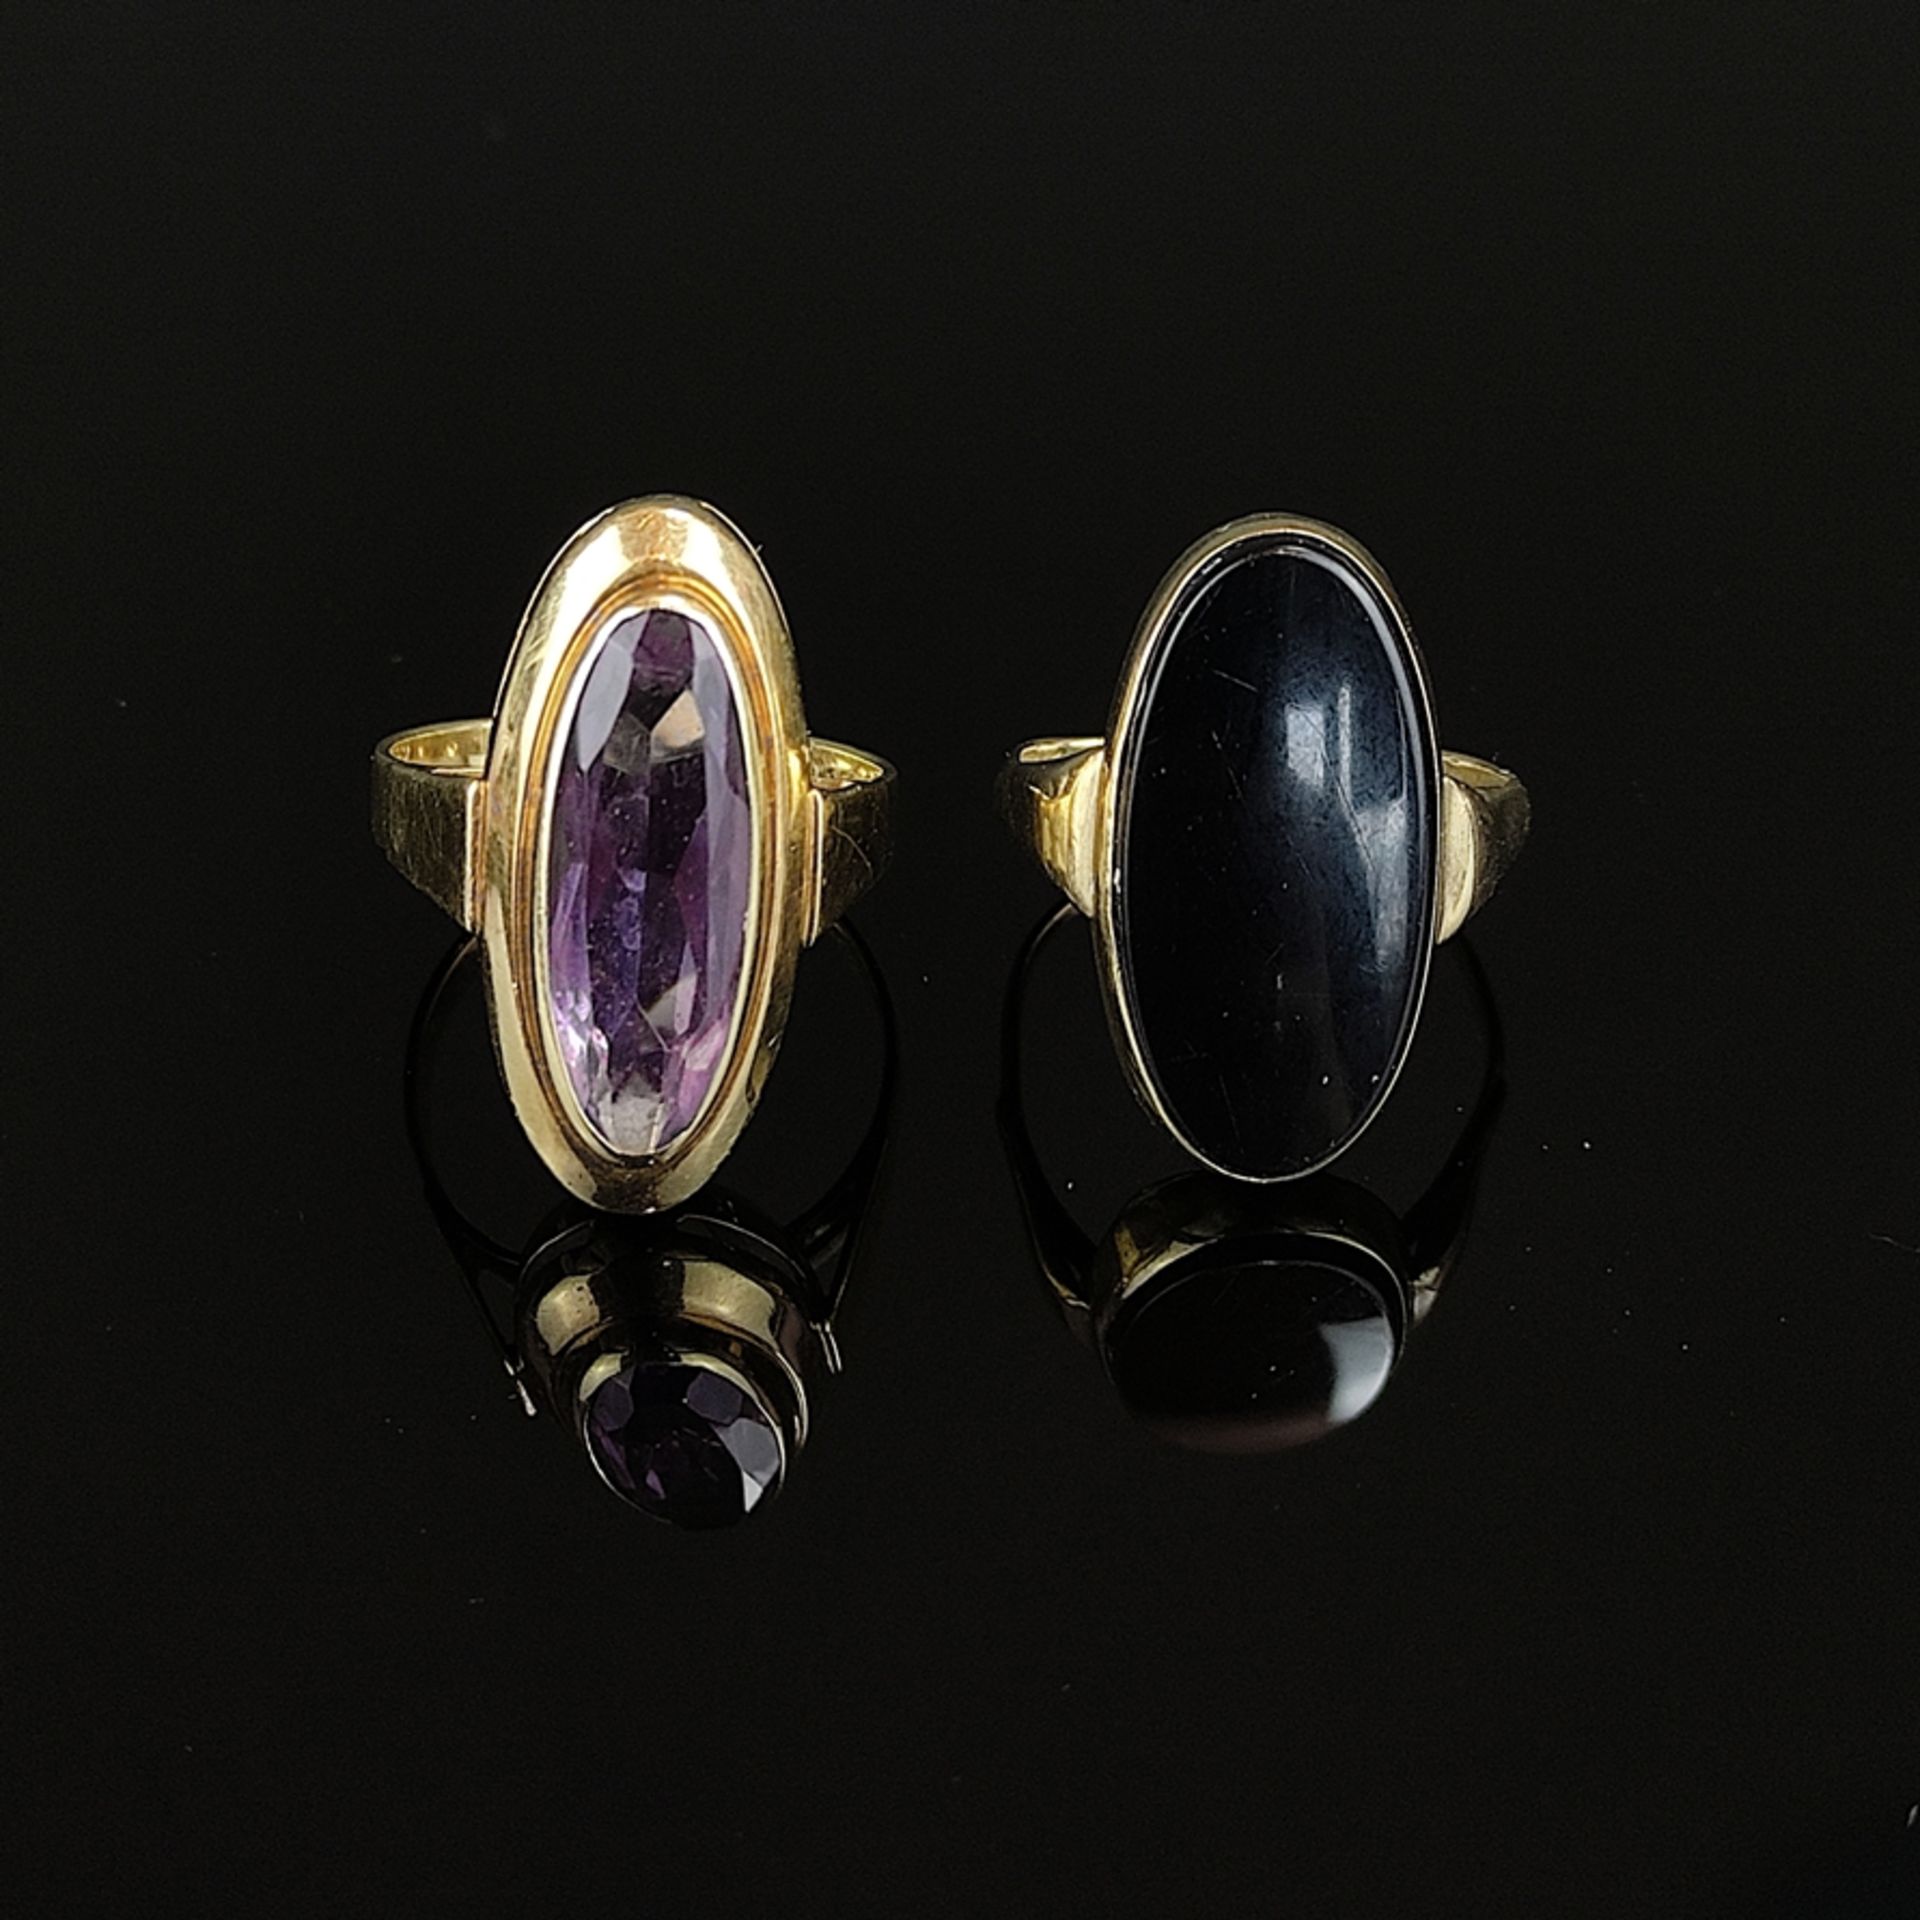 Two gold rings, one amethyst ring, 585/14K yellow gold (hallmarked), total weight 4.88g, central el - Image 2 of 5